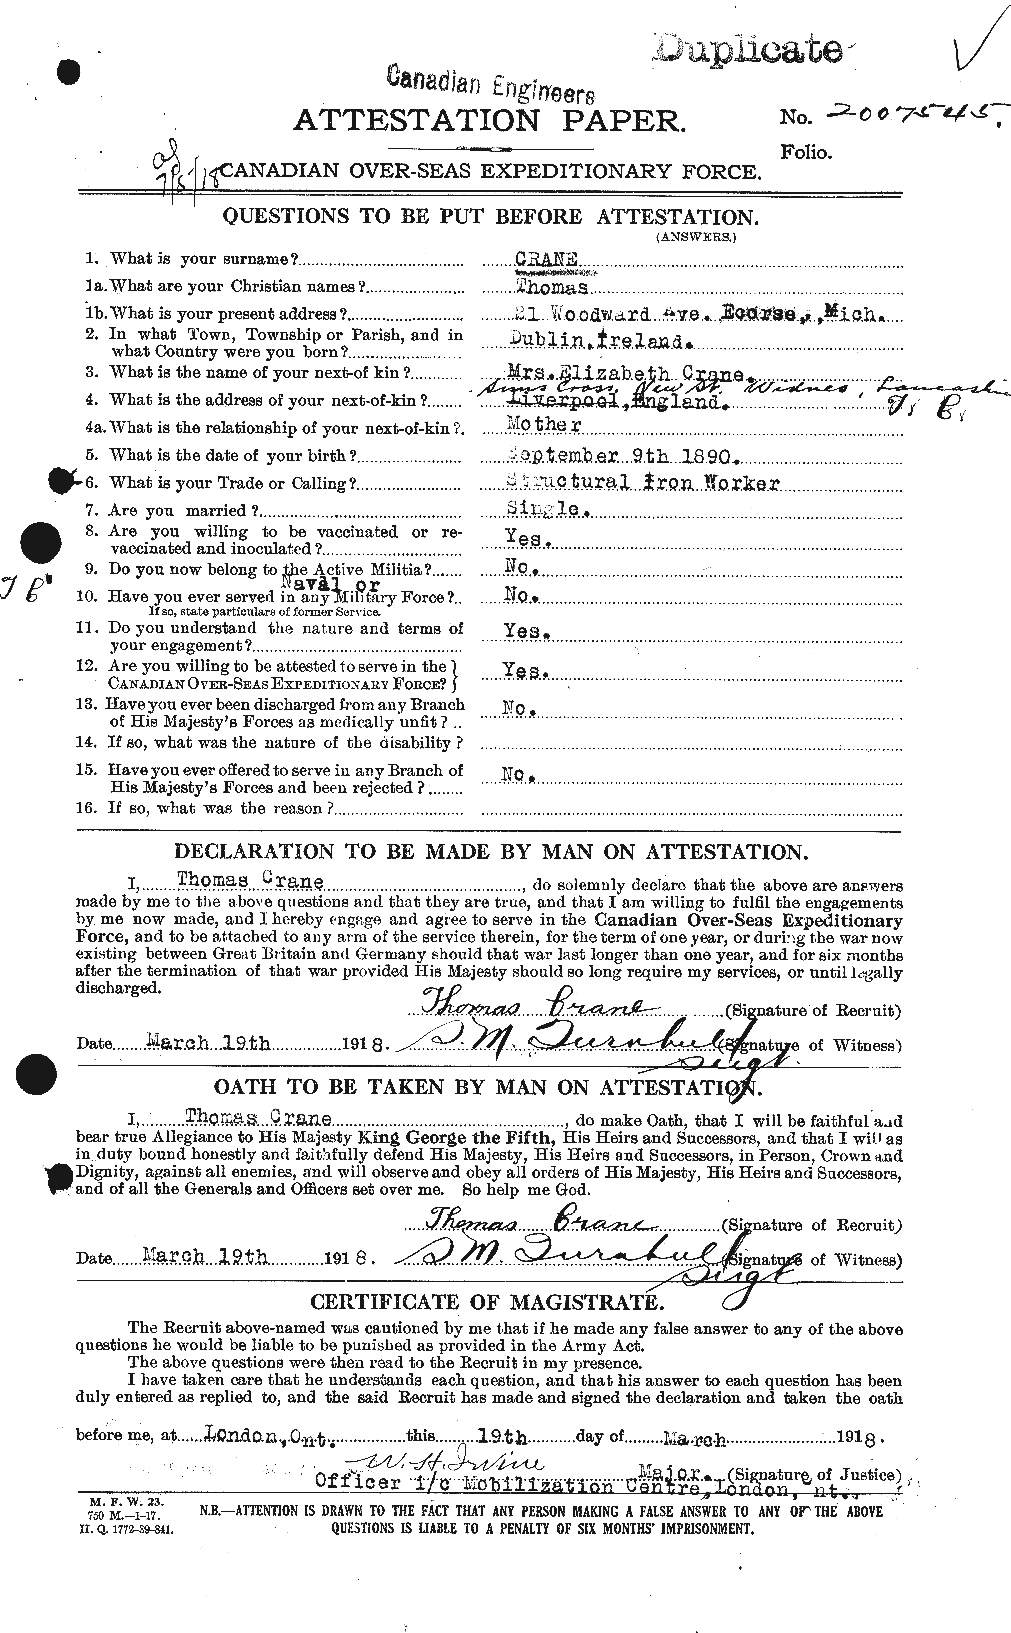 Personnel Records of the First World War - CEF 061744a